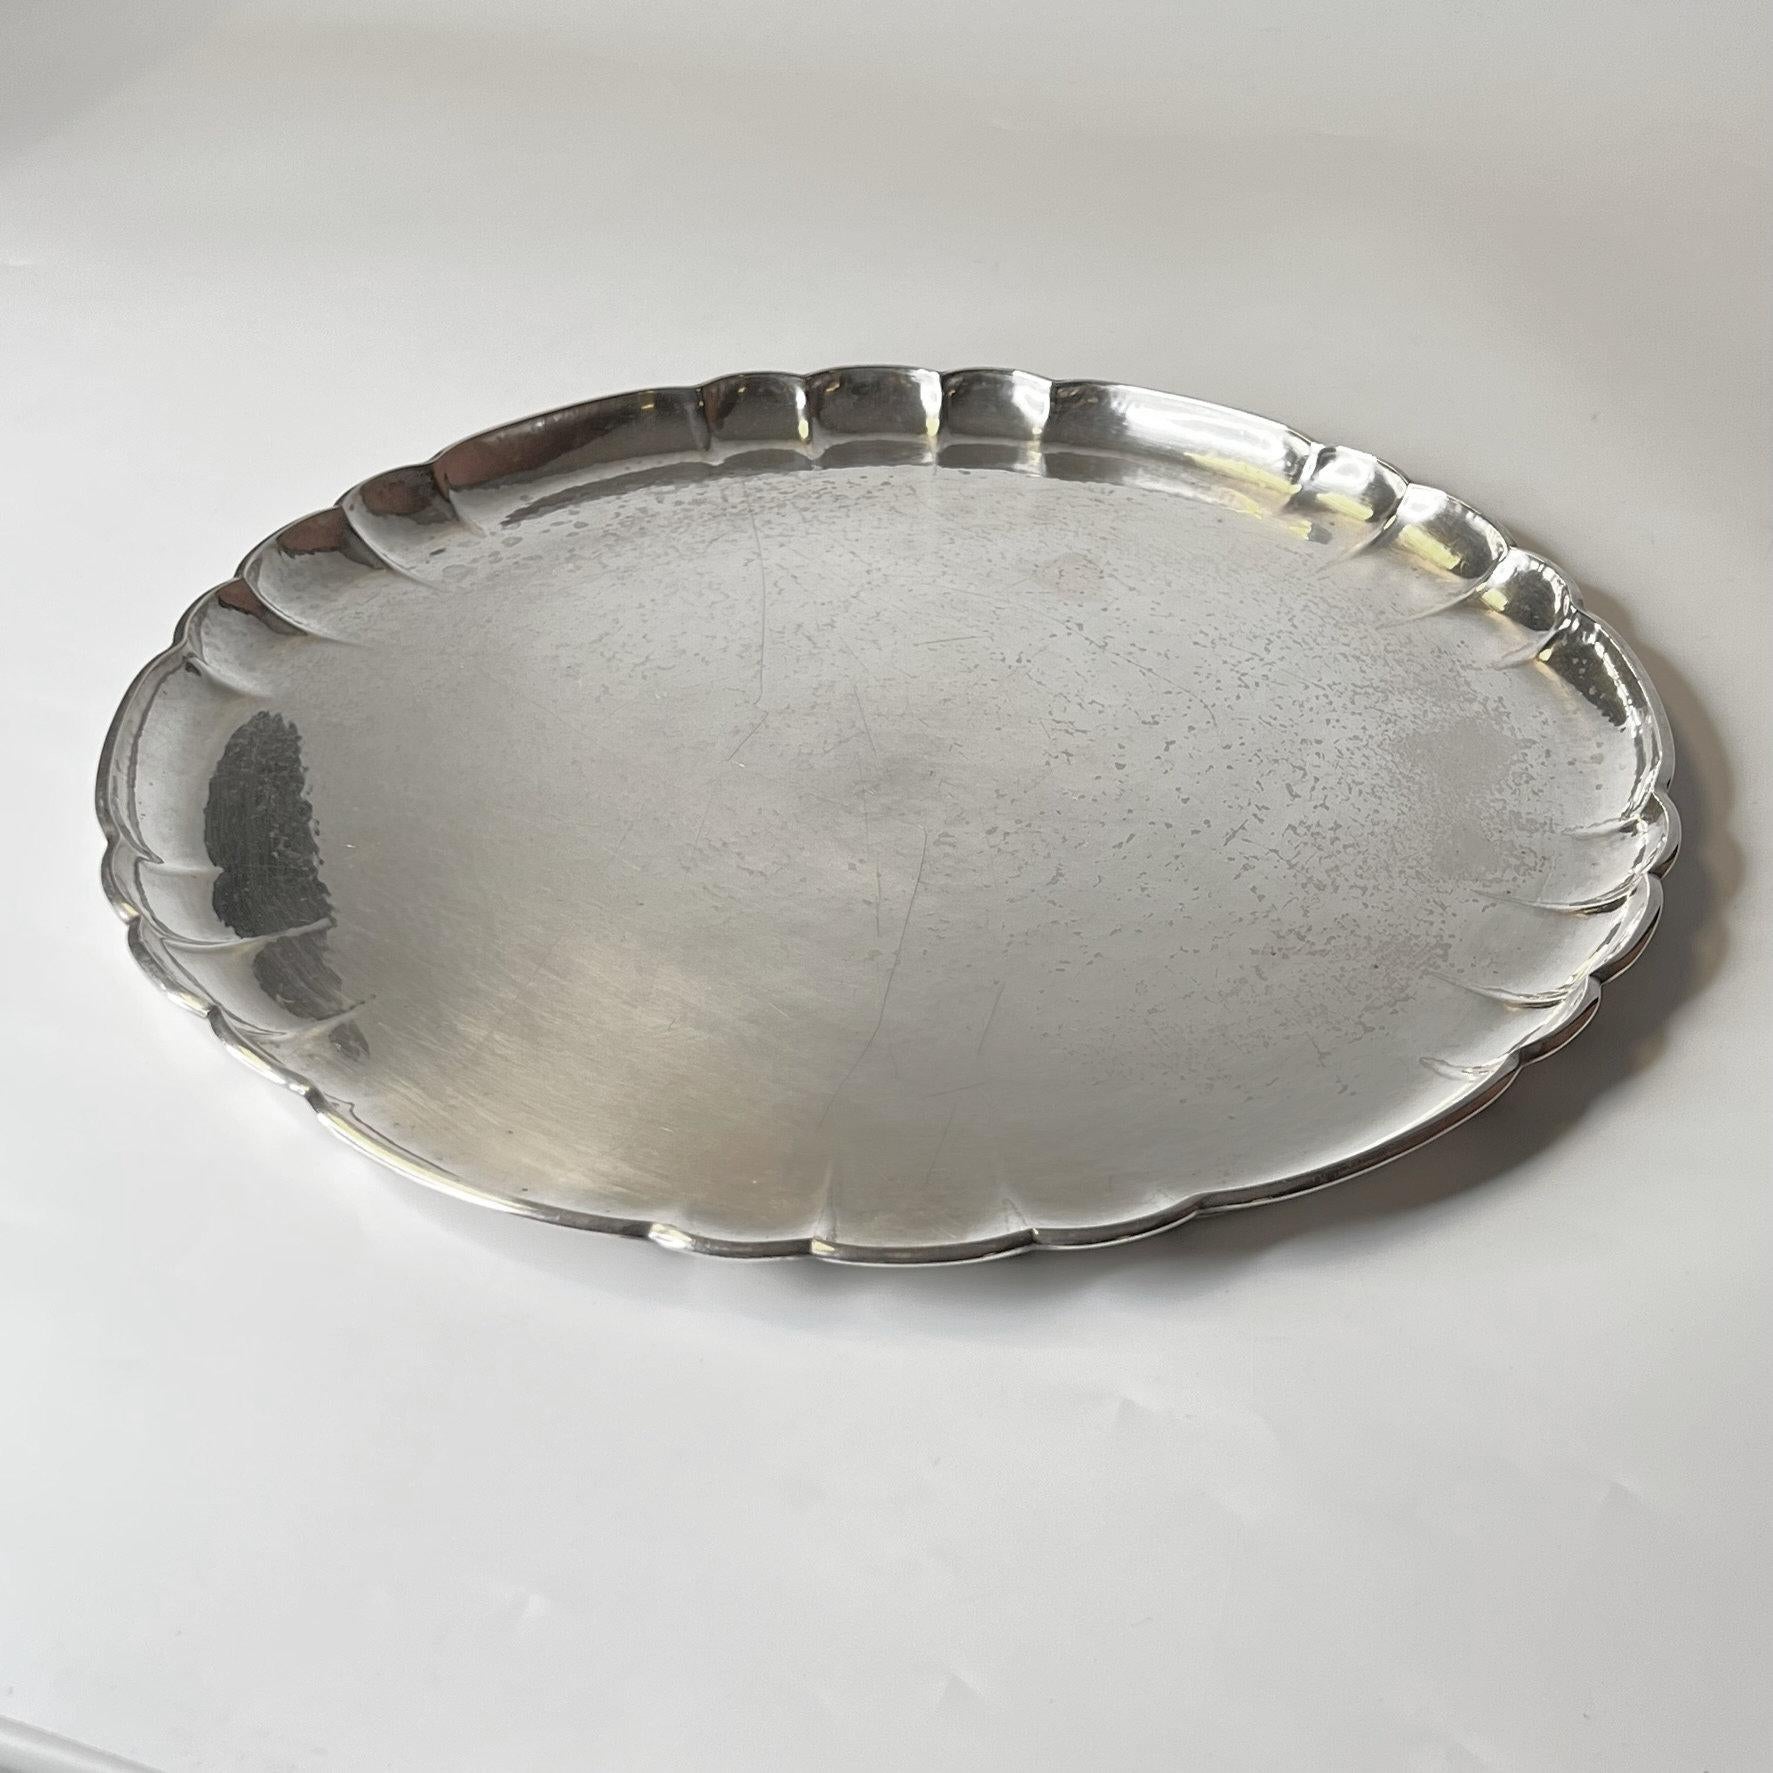 Our circular sterling silver platter from Georg Jensen dates from circa 1930 and is in good condition, with a handful of scratches. Measure: 14.5 inches (36.8 cm) across.